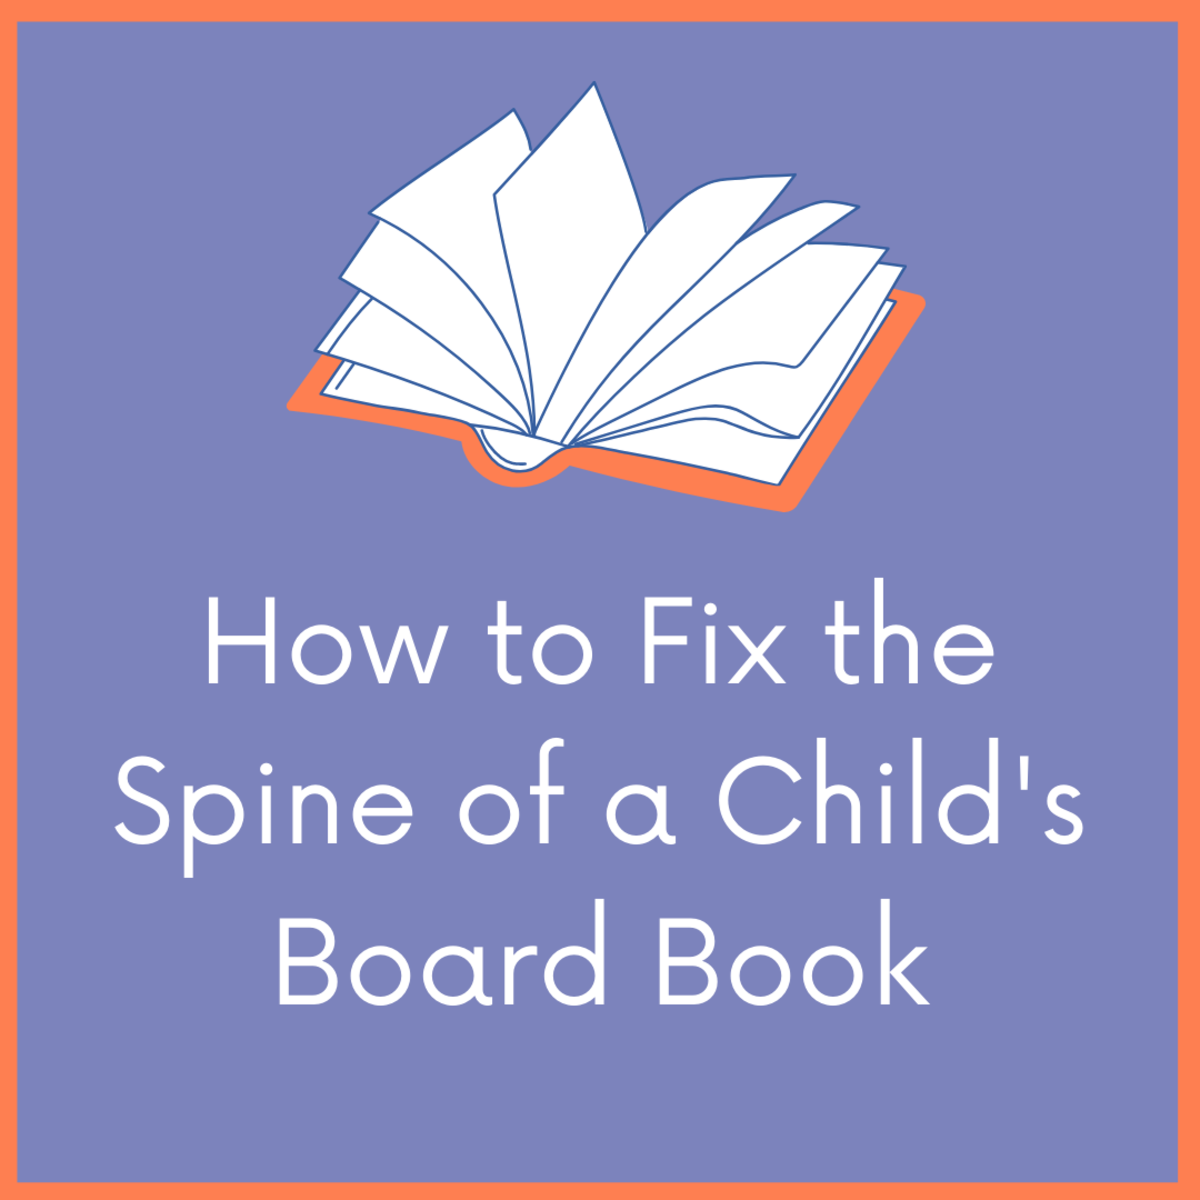 How to Repair the Spine of a Child's Board Book